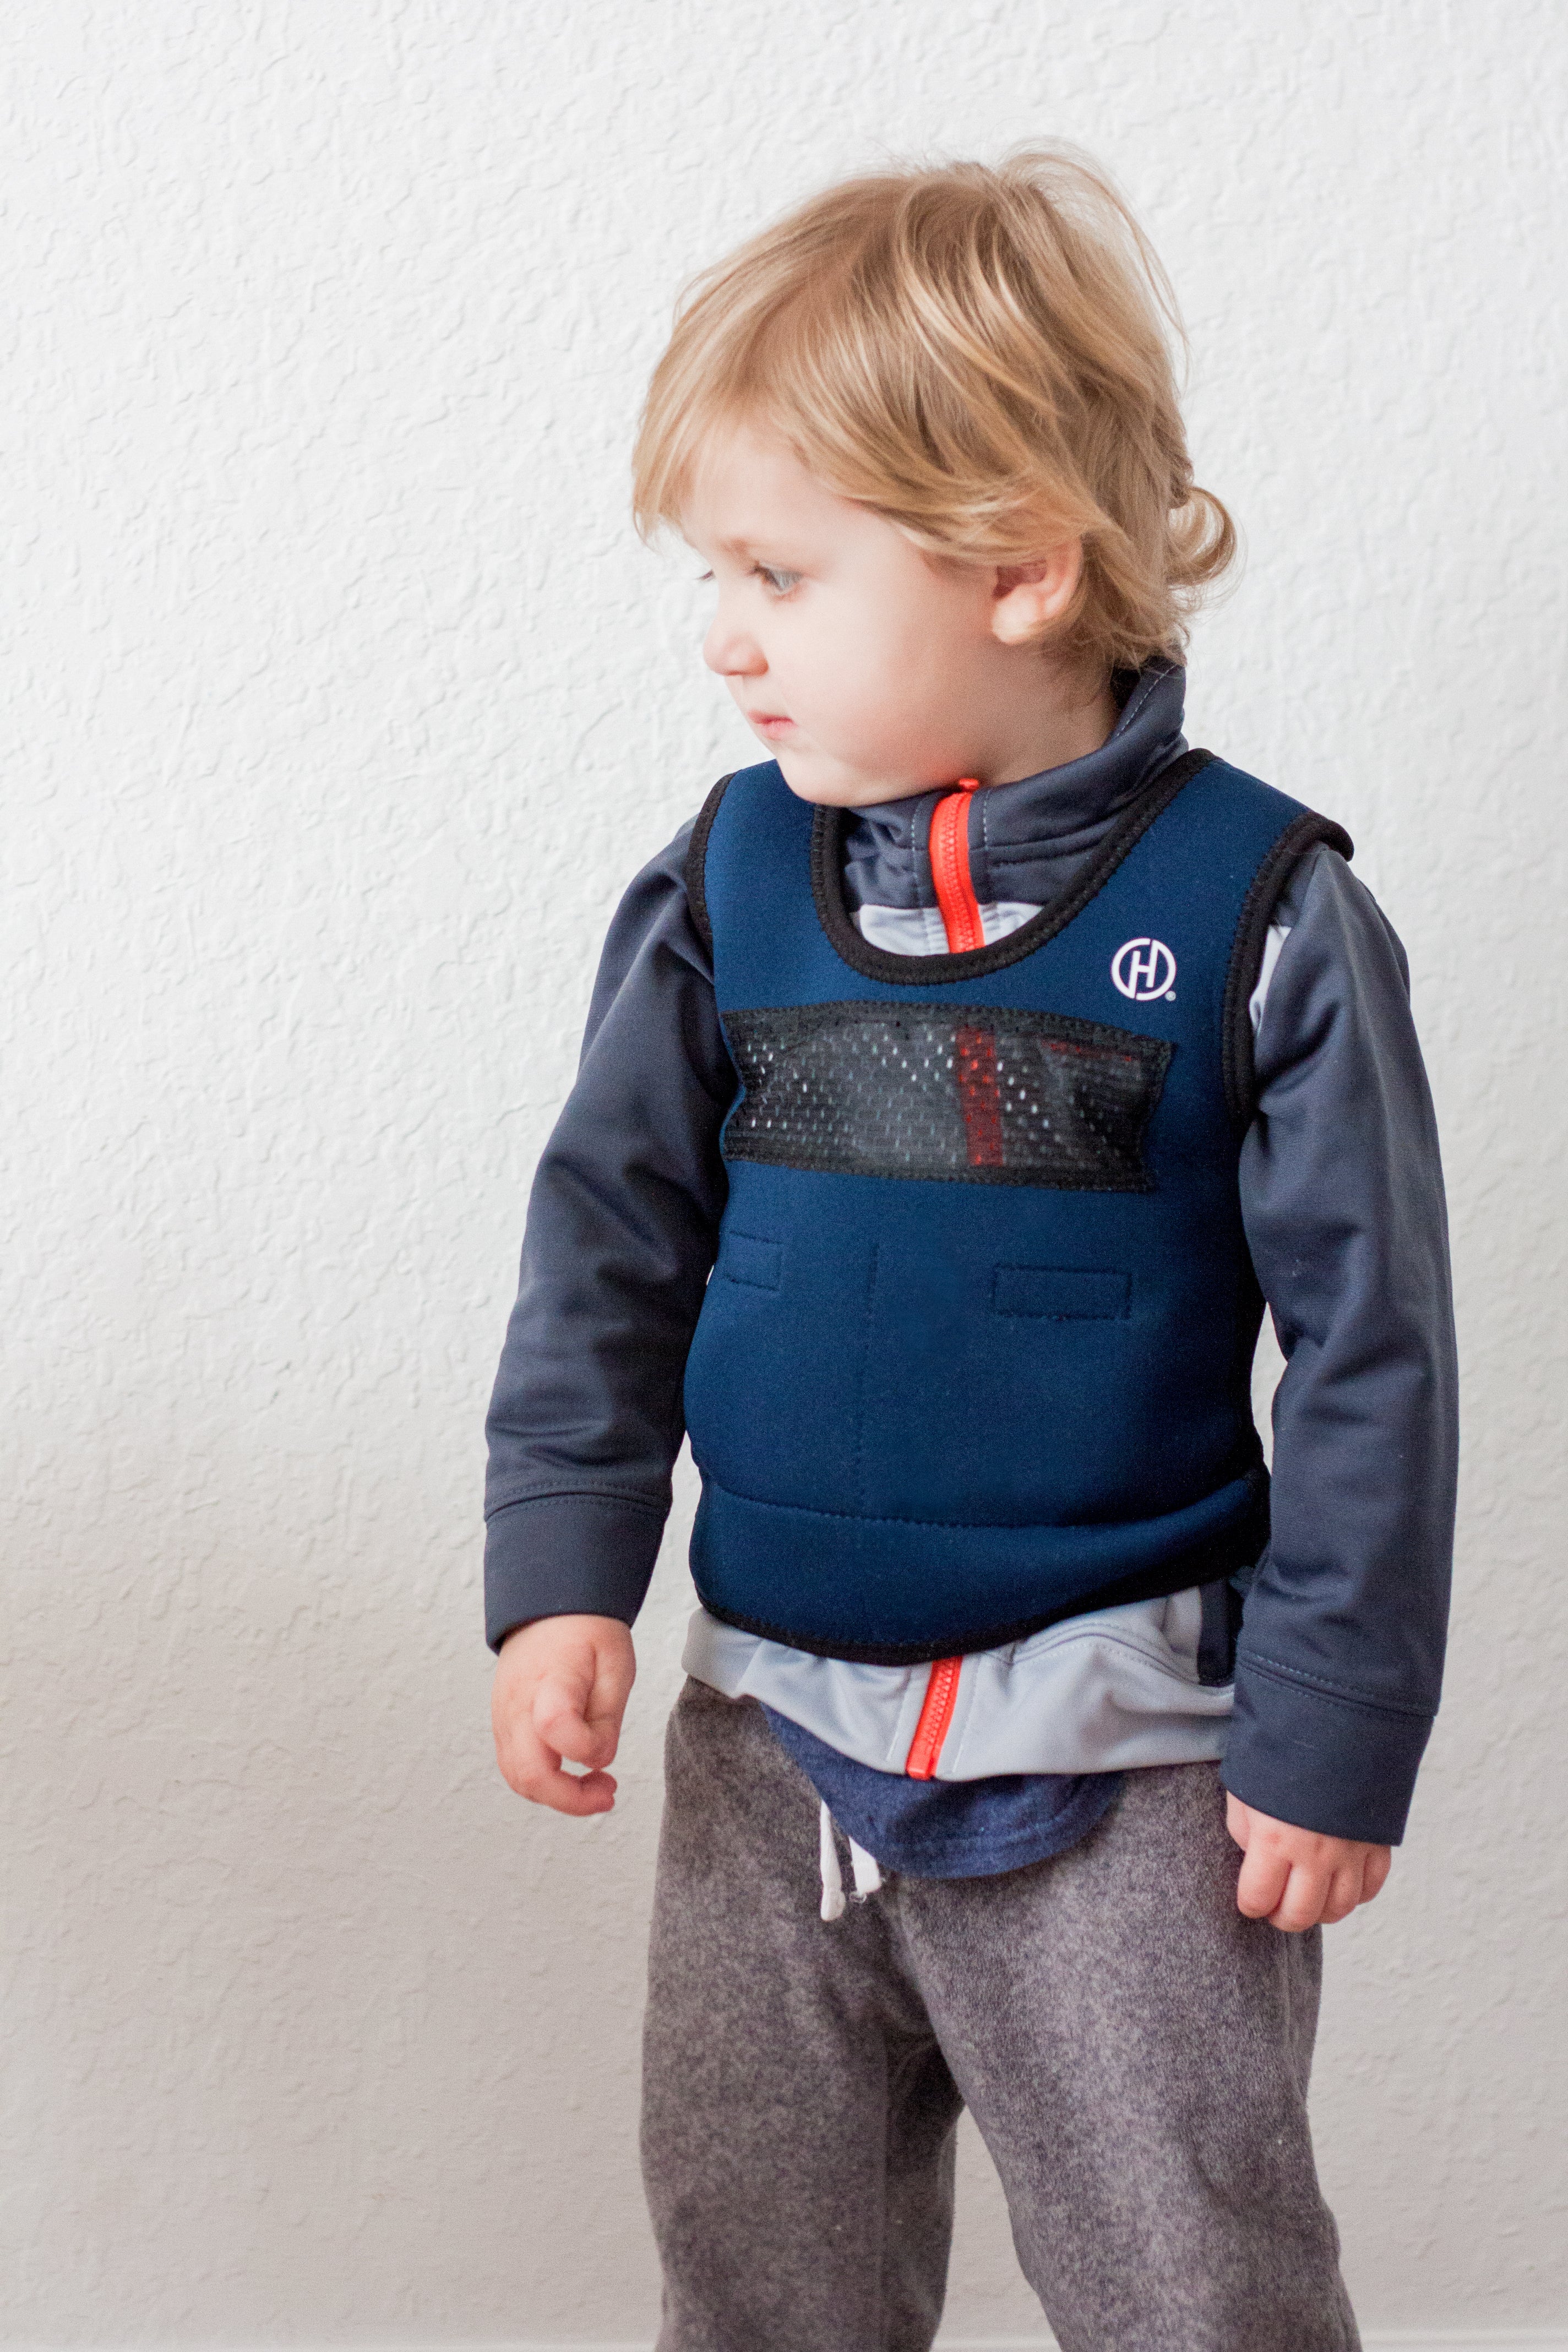 A child with light skin tone and short blonde hair is wearing a Weighted Compression Vest over their sweat shirt.